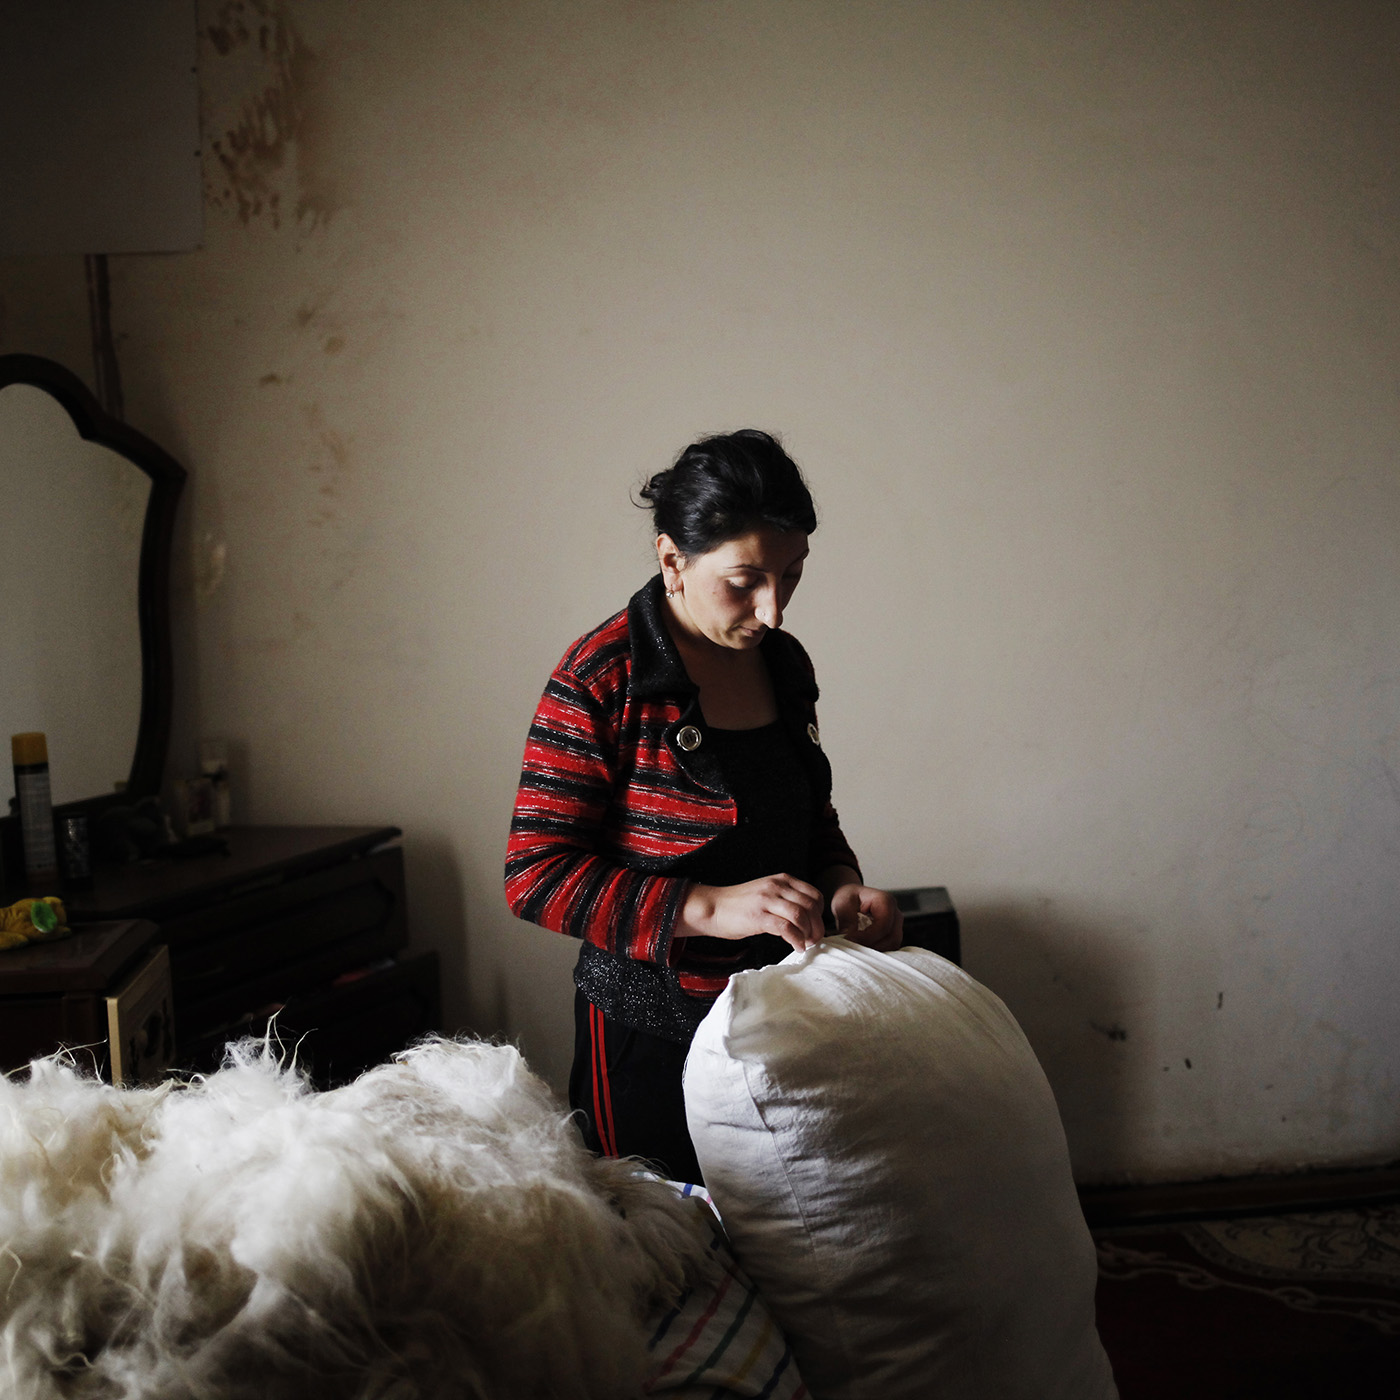  Early in the morning, Ruzanna prepares bed mattress for her children with sheep wool bought a few days ago.    